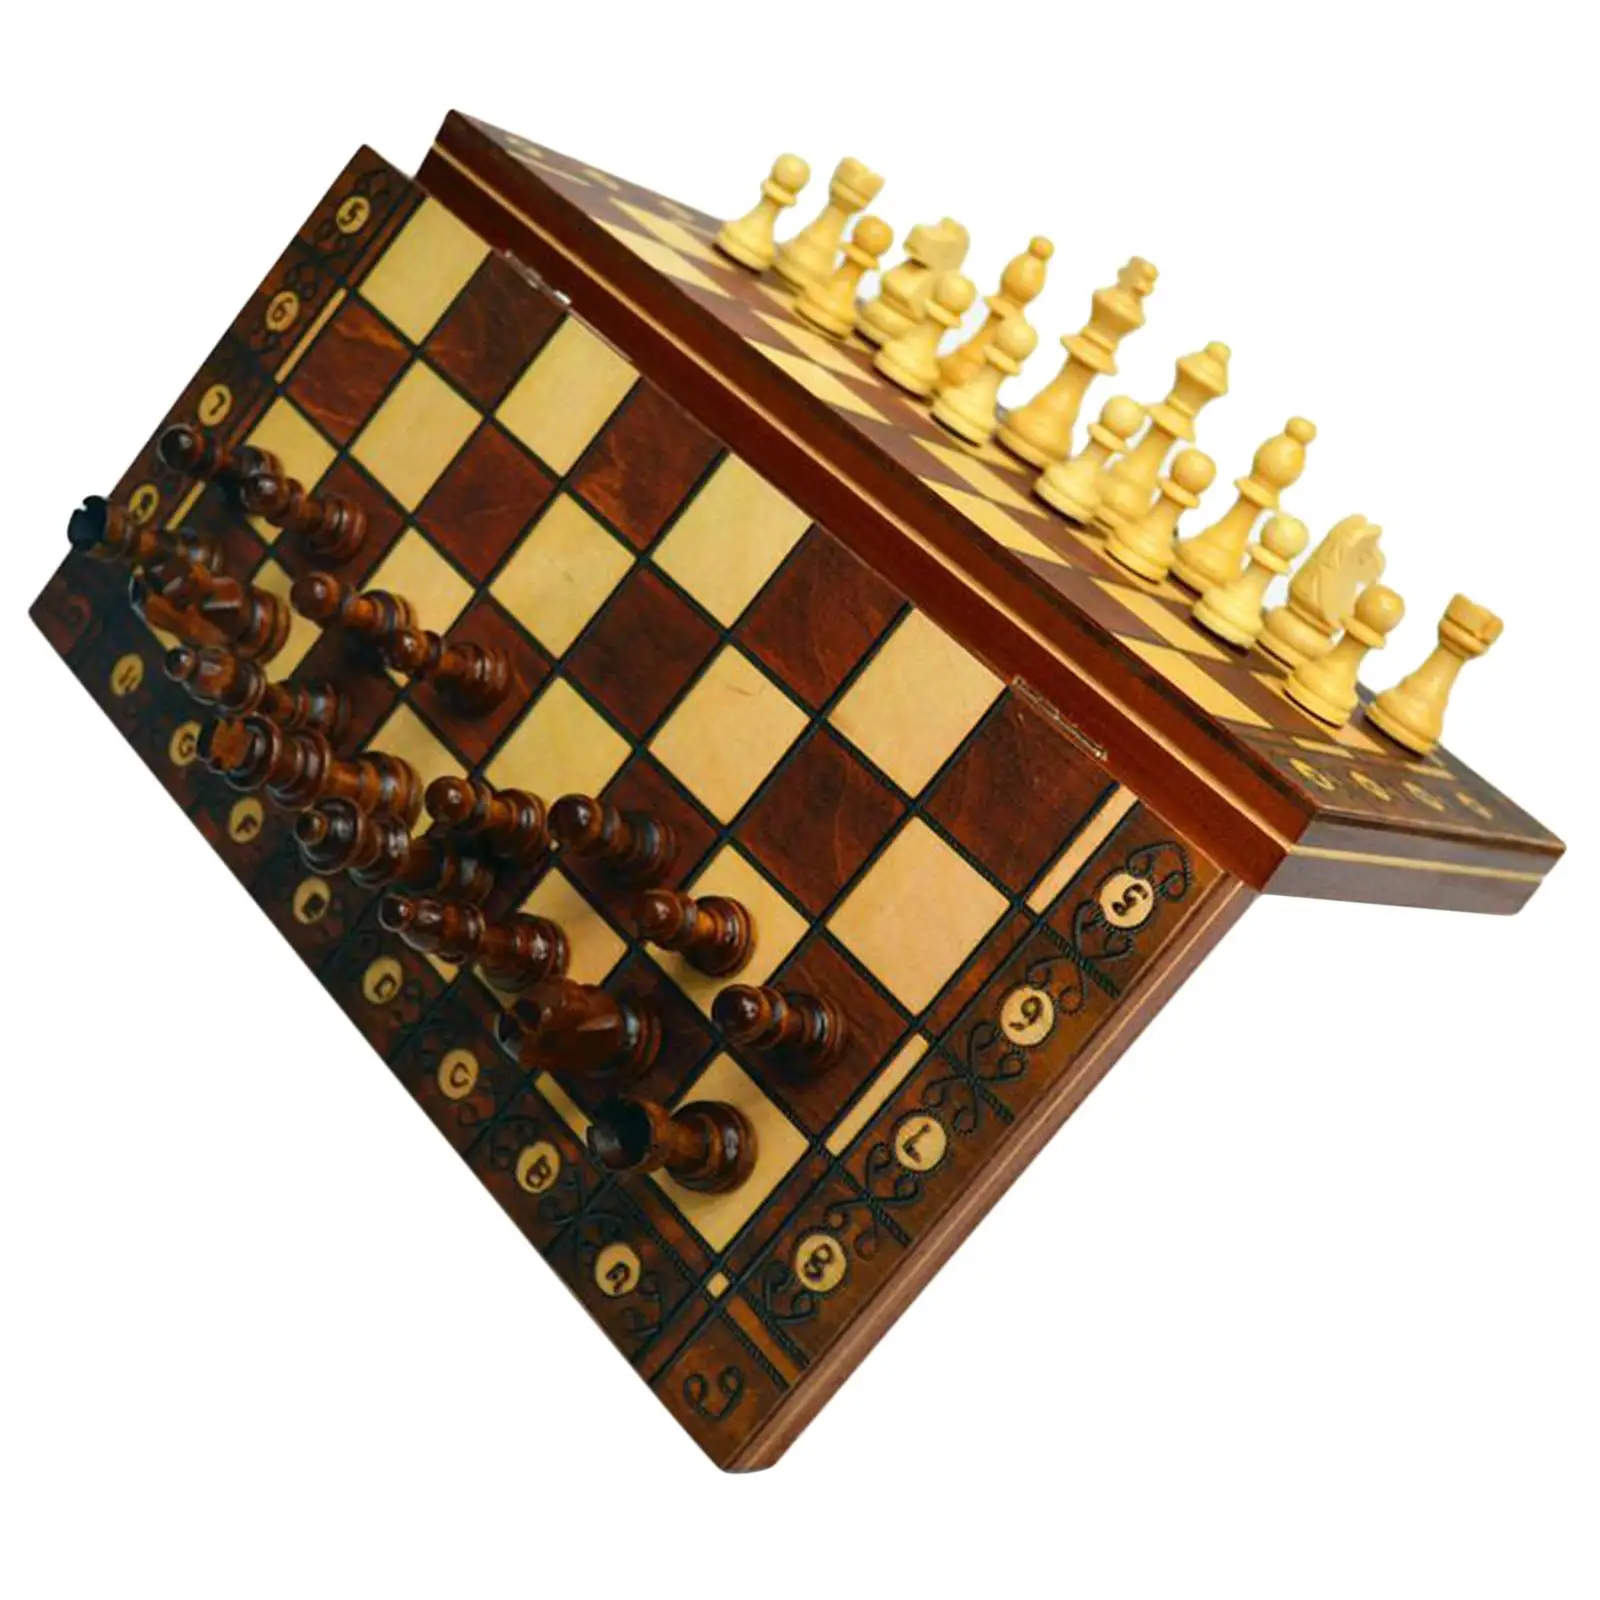 3 in 1 Wooden Folding Board Toys Chess, Checkers, Backgammon for Kids 34x34cm